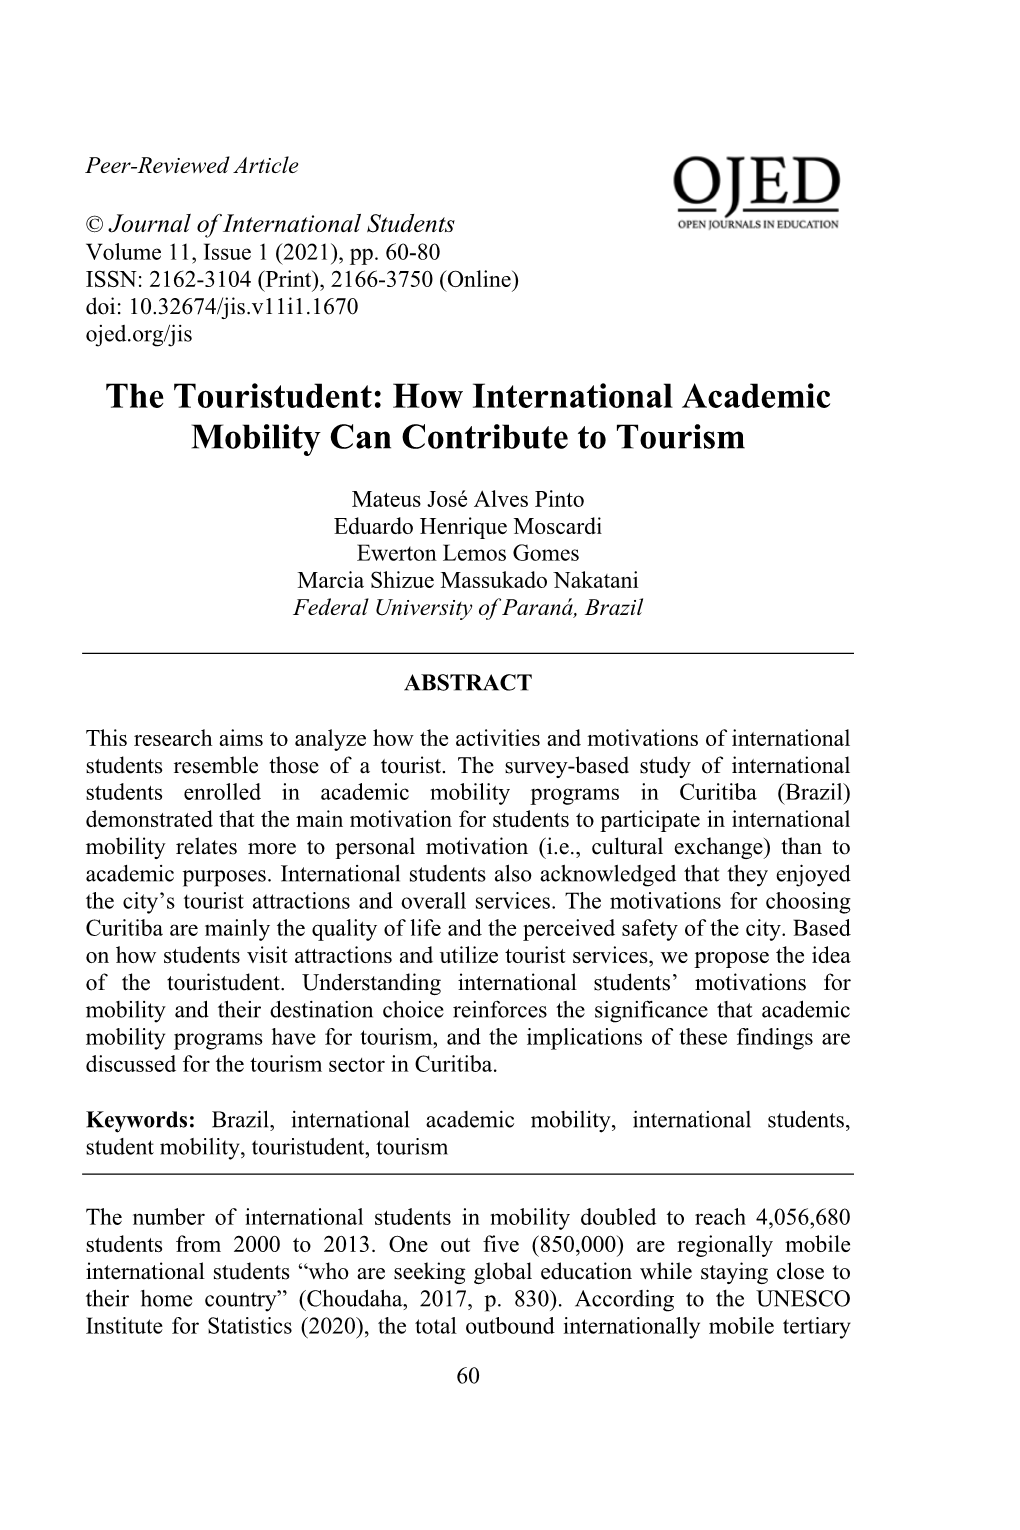 How International Academic Mobility Can Contribute to Tourism